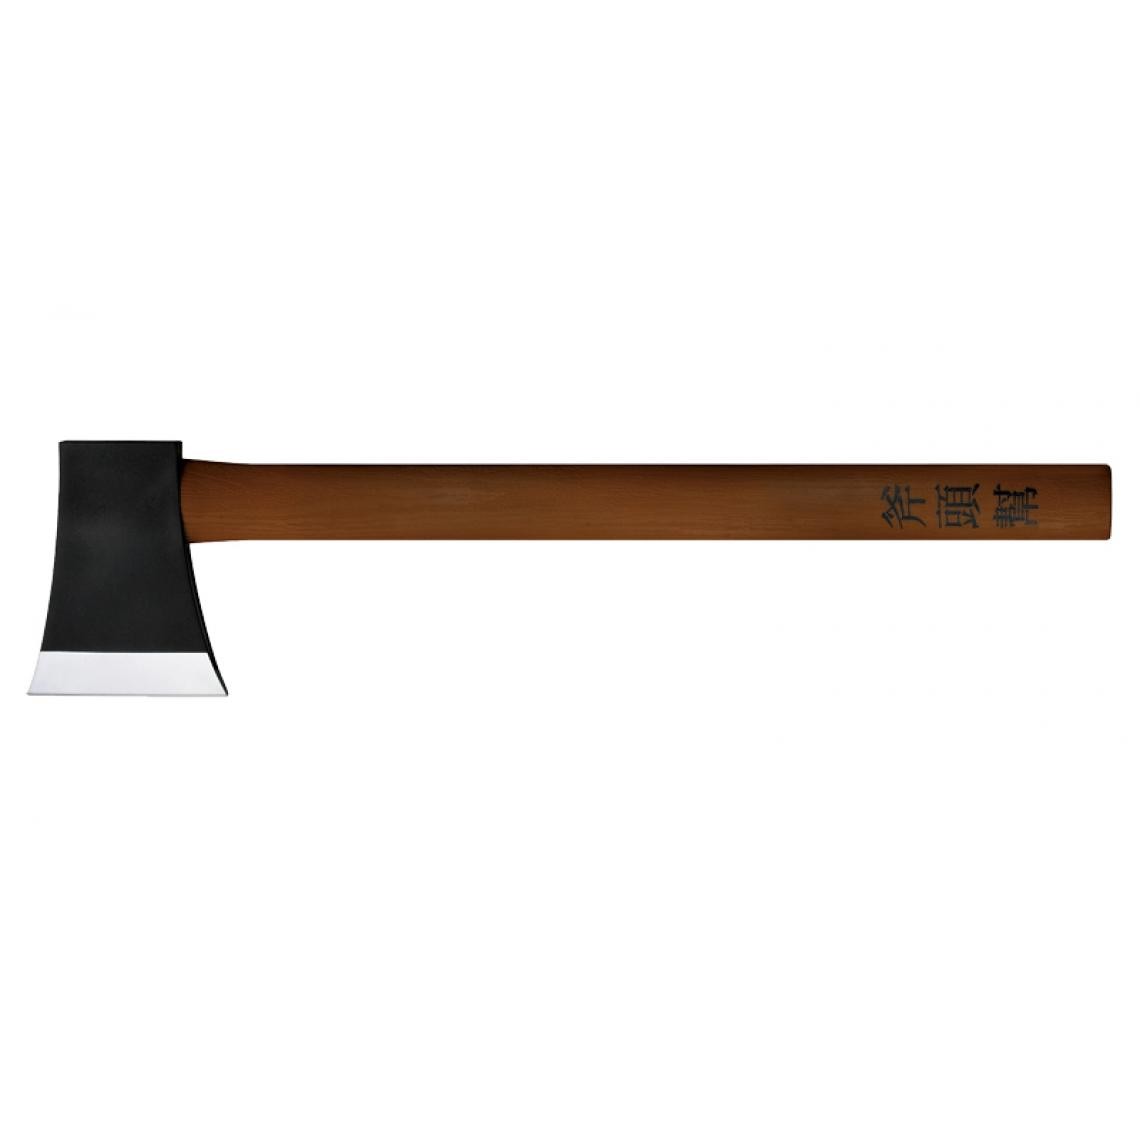 Divers Marques - COLD STEEL - CS92BKAXG - COLD STEEL - AXE GANG HATCHET TRAINER - Outils de coupe